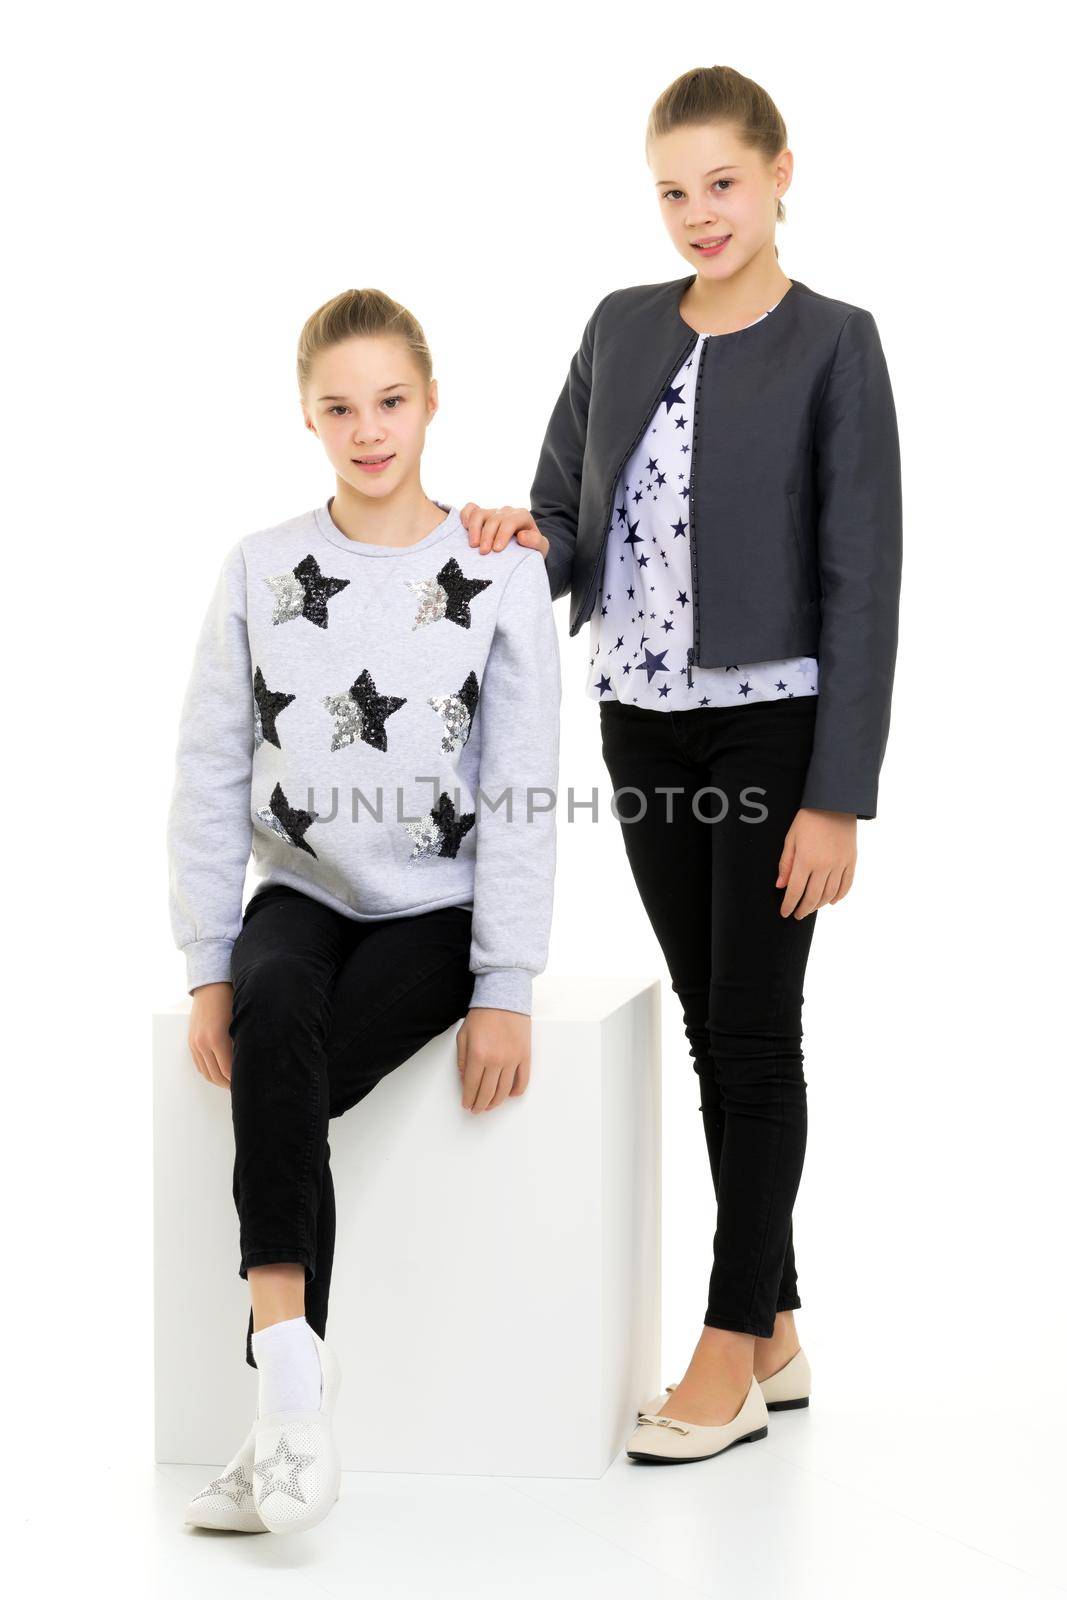 Pretty Sisters Standing Leaning on Cube with one Knee and Looking at Camera, Full Length Portrait of Two Teen Girls Wearing Trendy Stylish Clothes Posing Together in Studio Against White Background